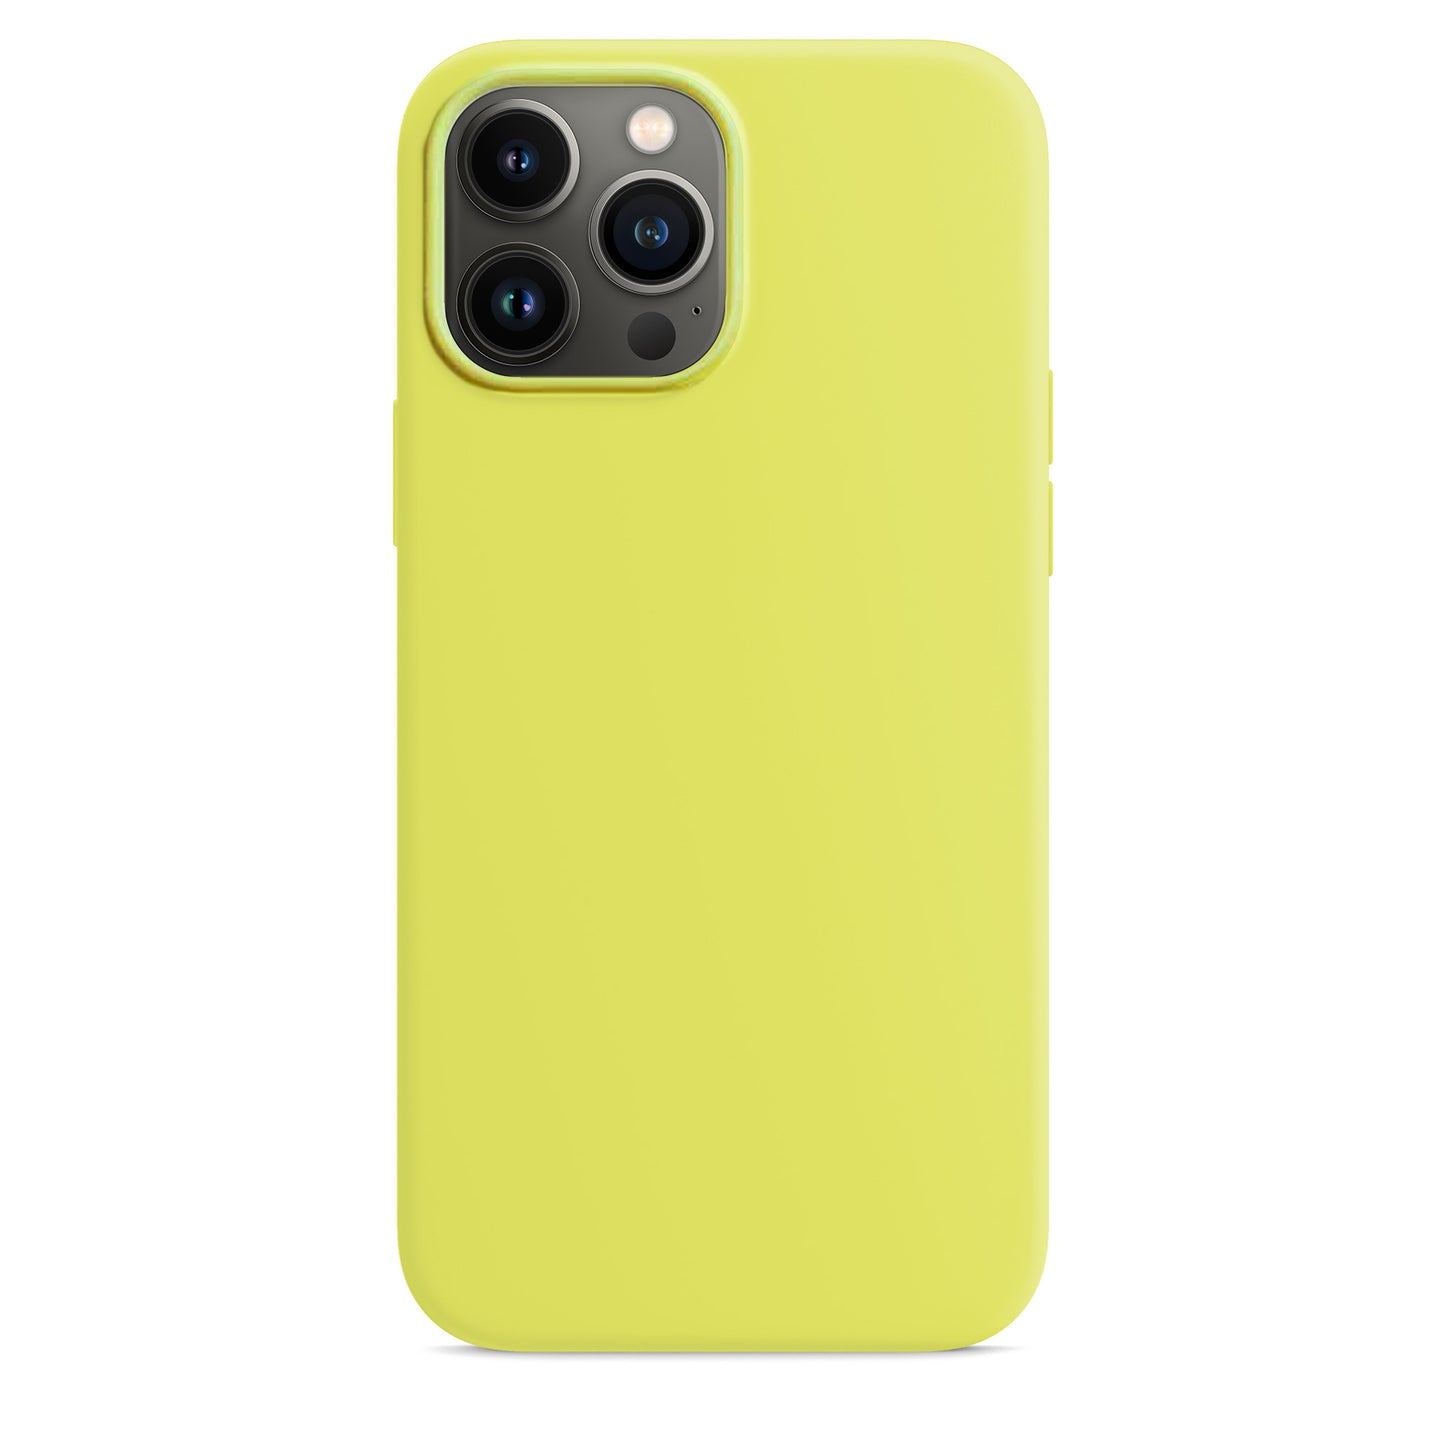 Lemon Zest Silicone Case for iPhone